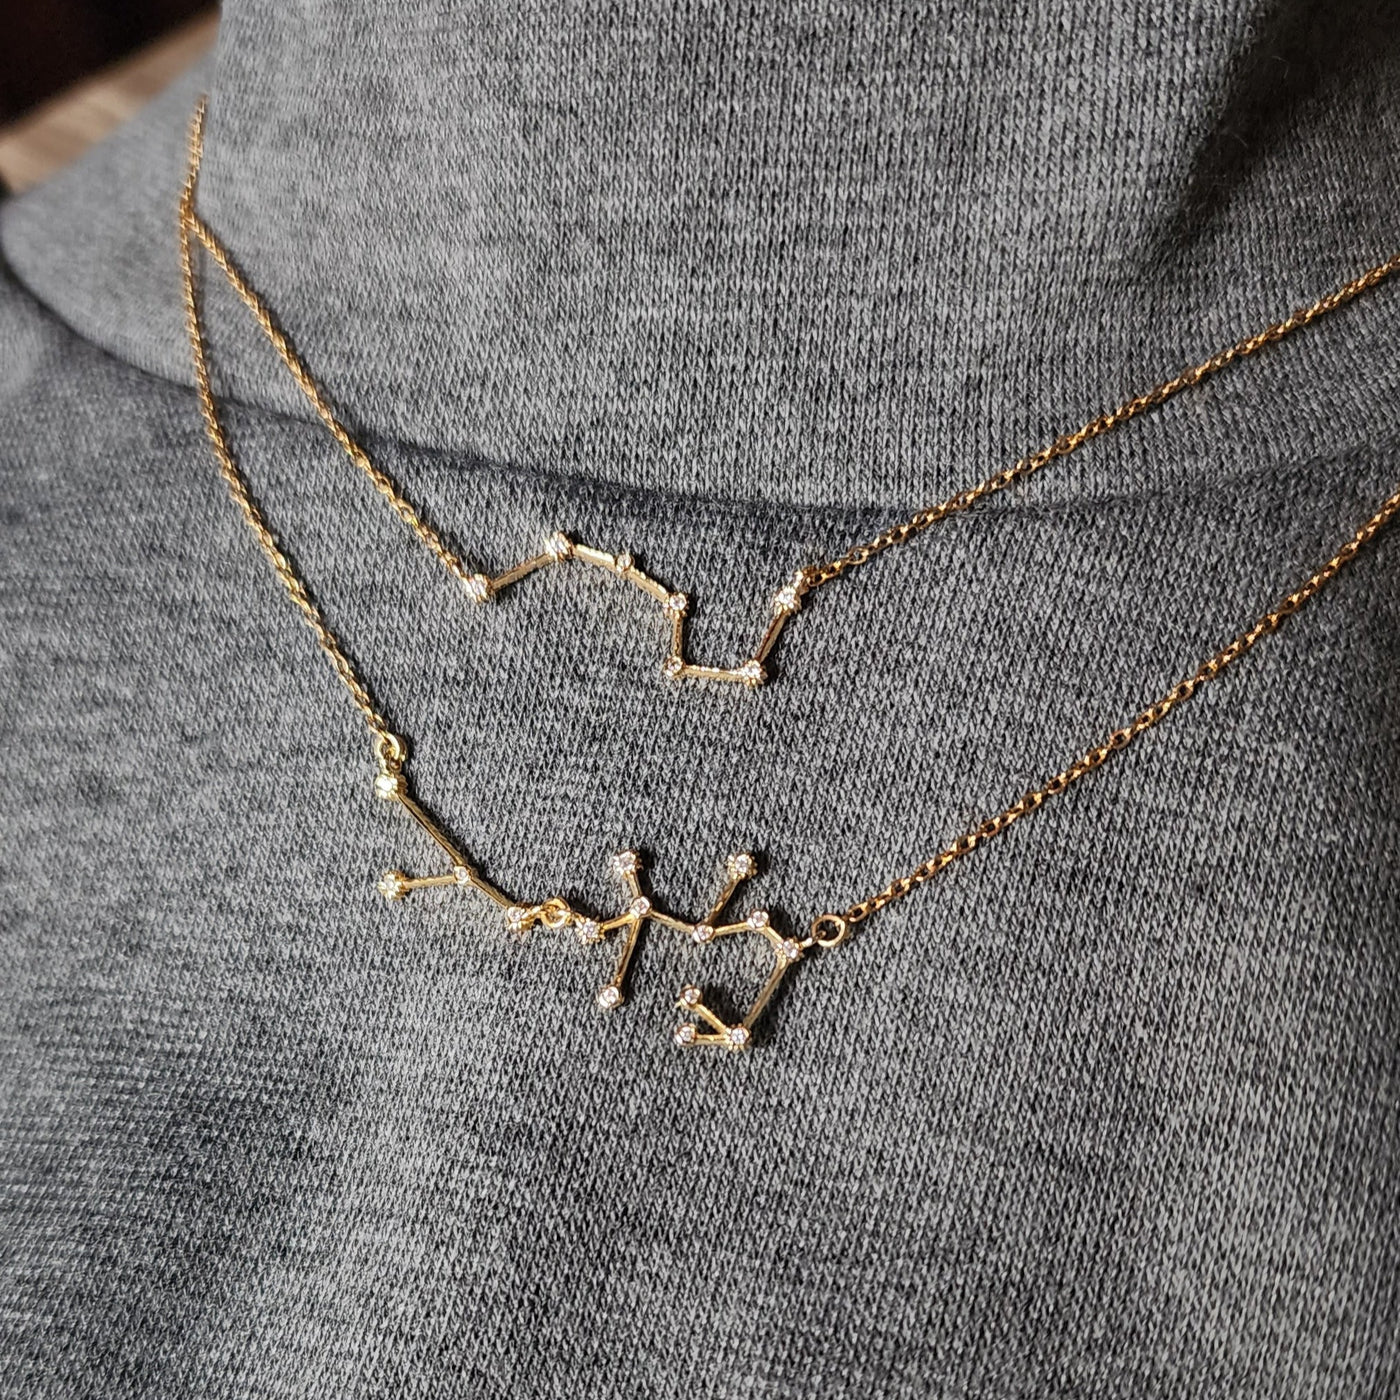 Constellation Family Tree Necklace